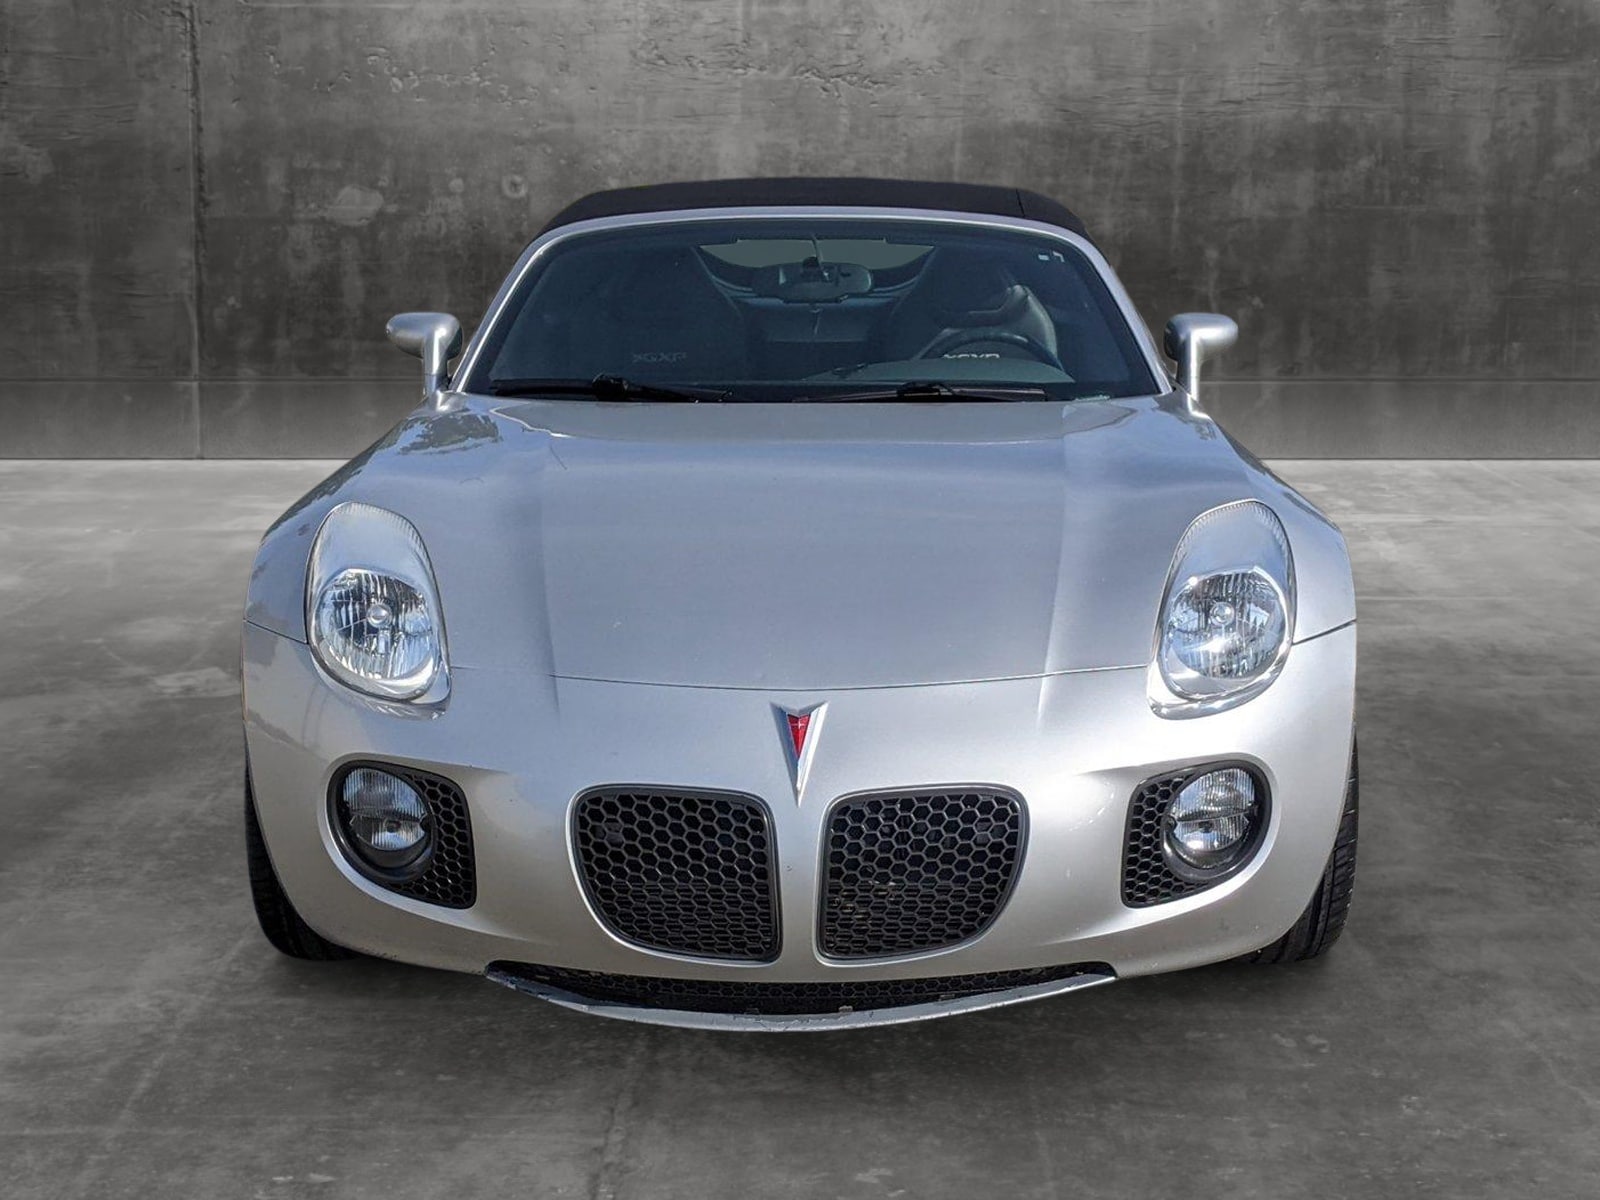 Used 2007 Pontiac Solstice GXP with VIN 1G2MG35X07Y122099 for sale in Hayward, CA